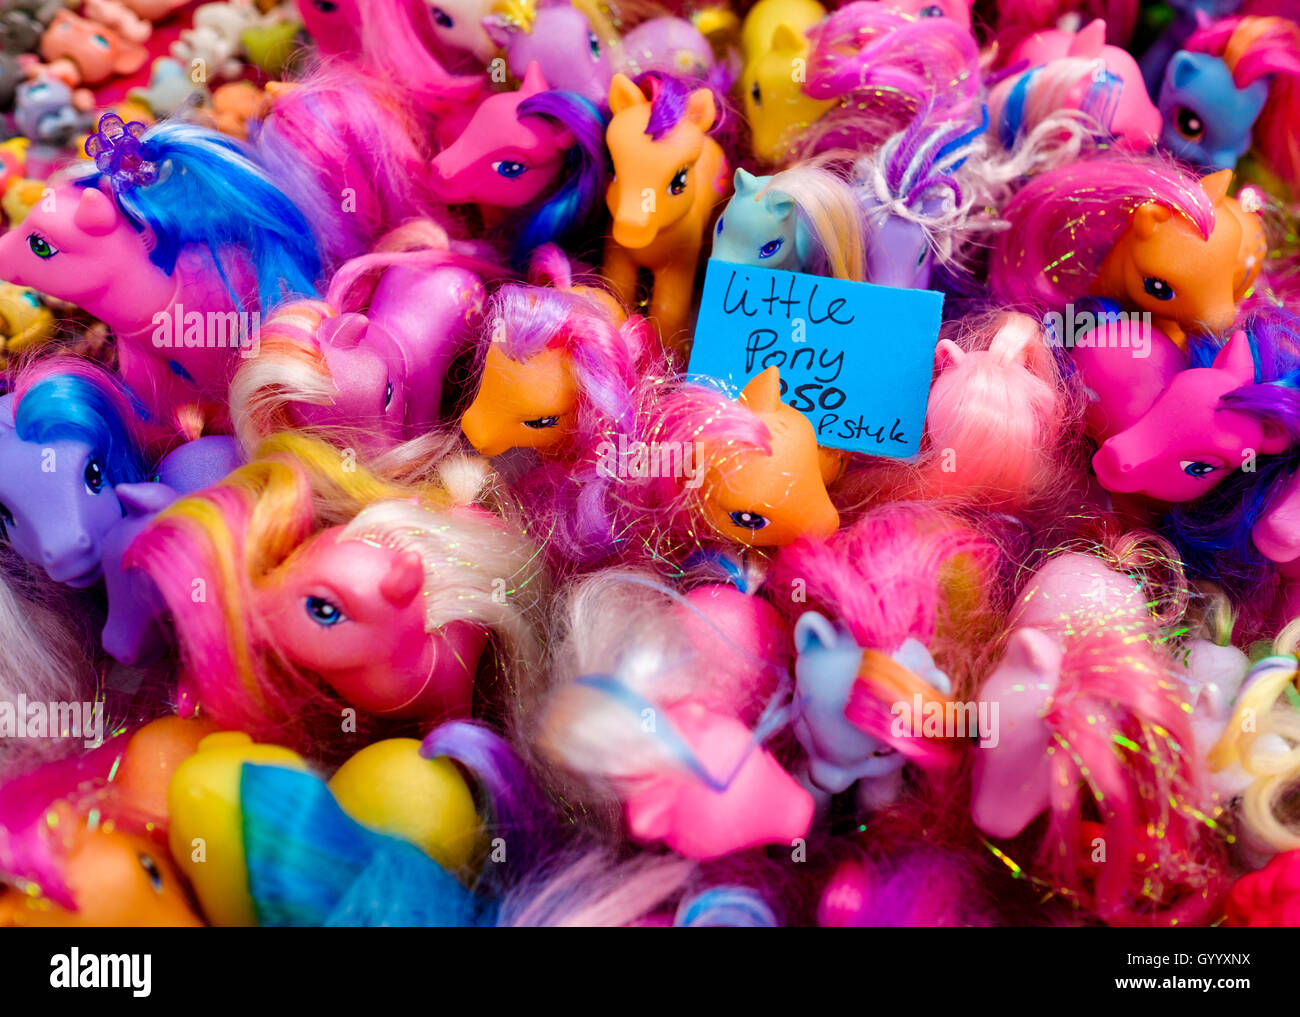 Plastic horses in a stall at a flea market, Amsterdam, The Netherlands Stock Photo